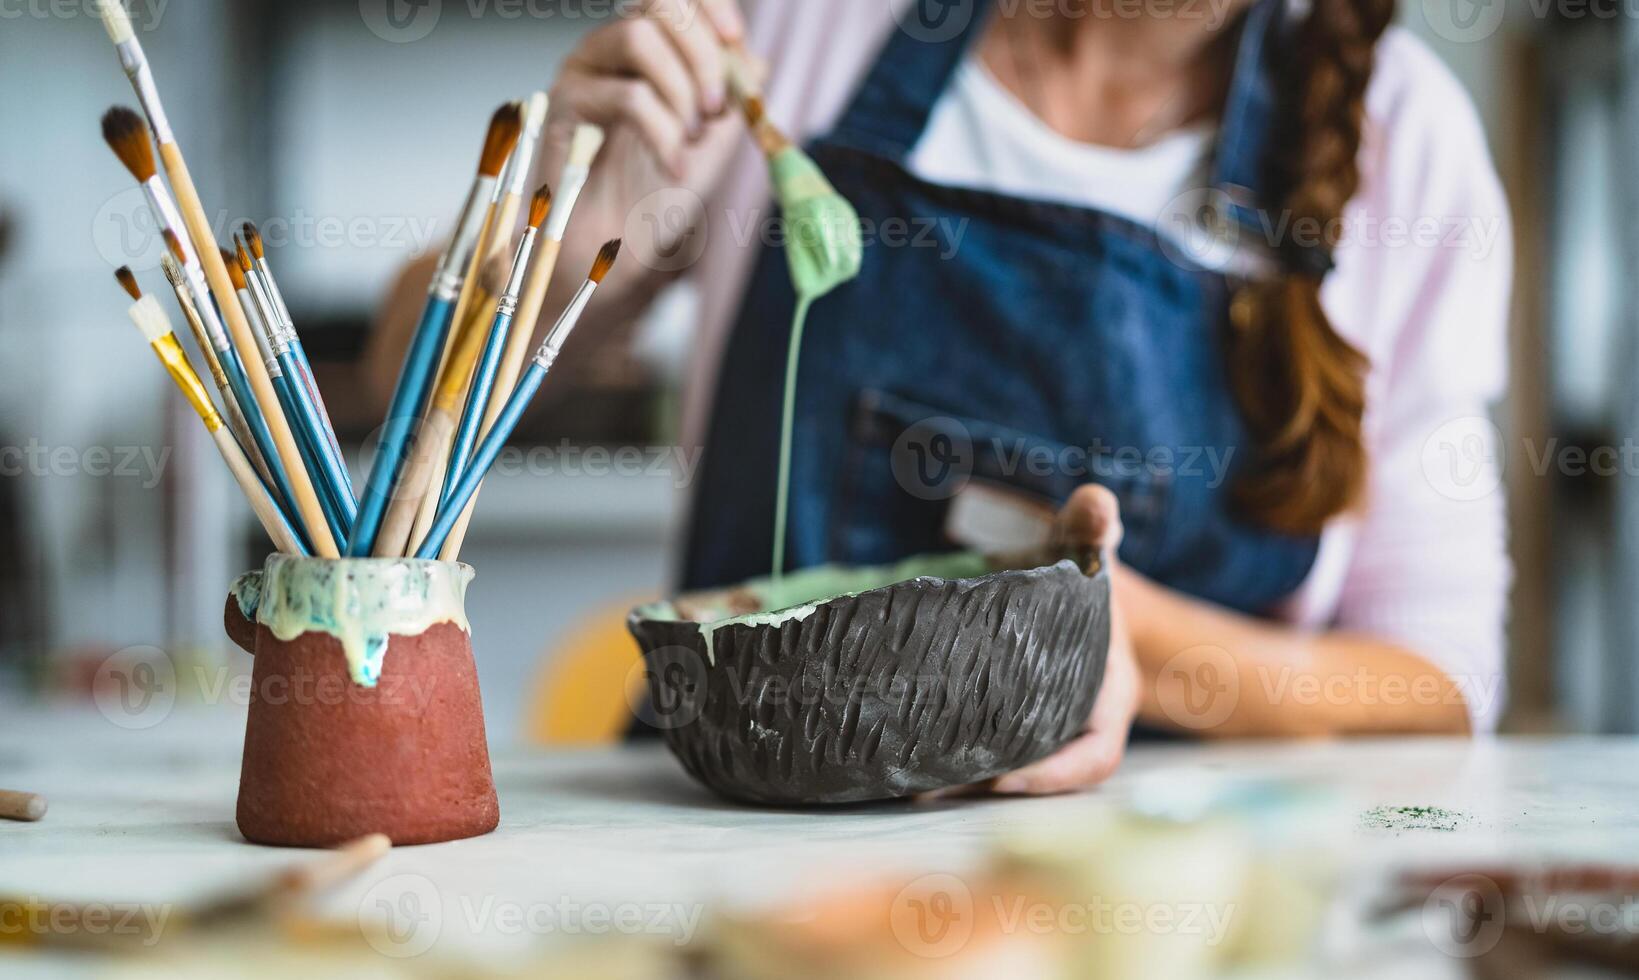 Woman mixing paint with brush inside ceramic bowl in workshop studio - Artisan work and creative craft concept photo